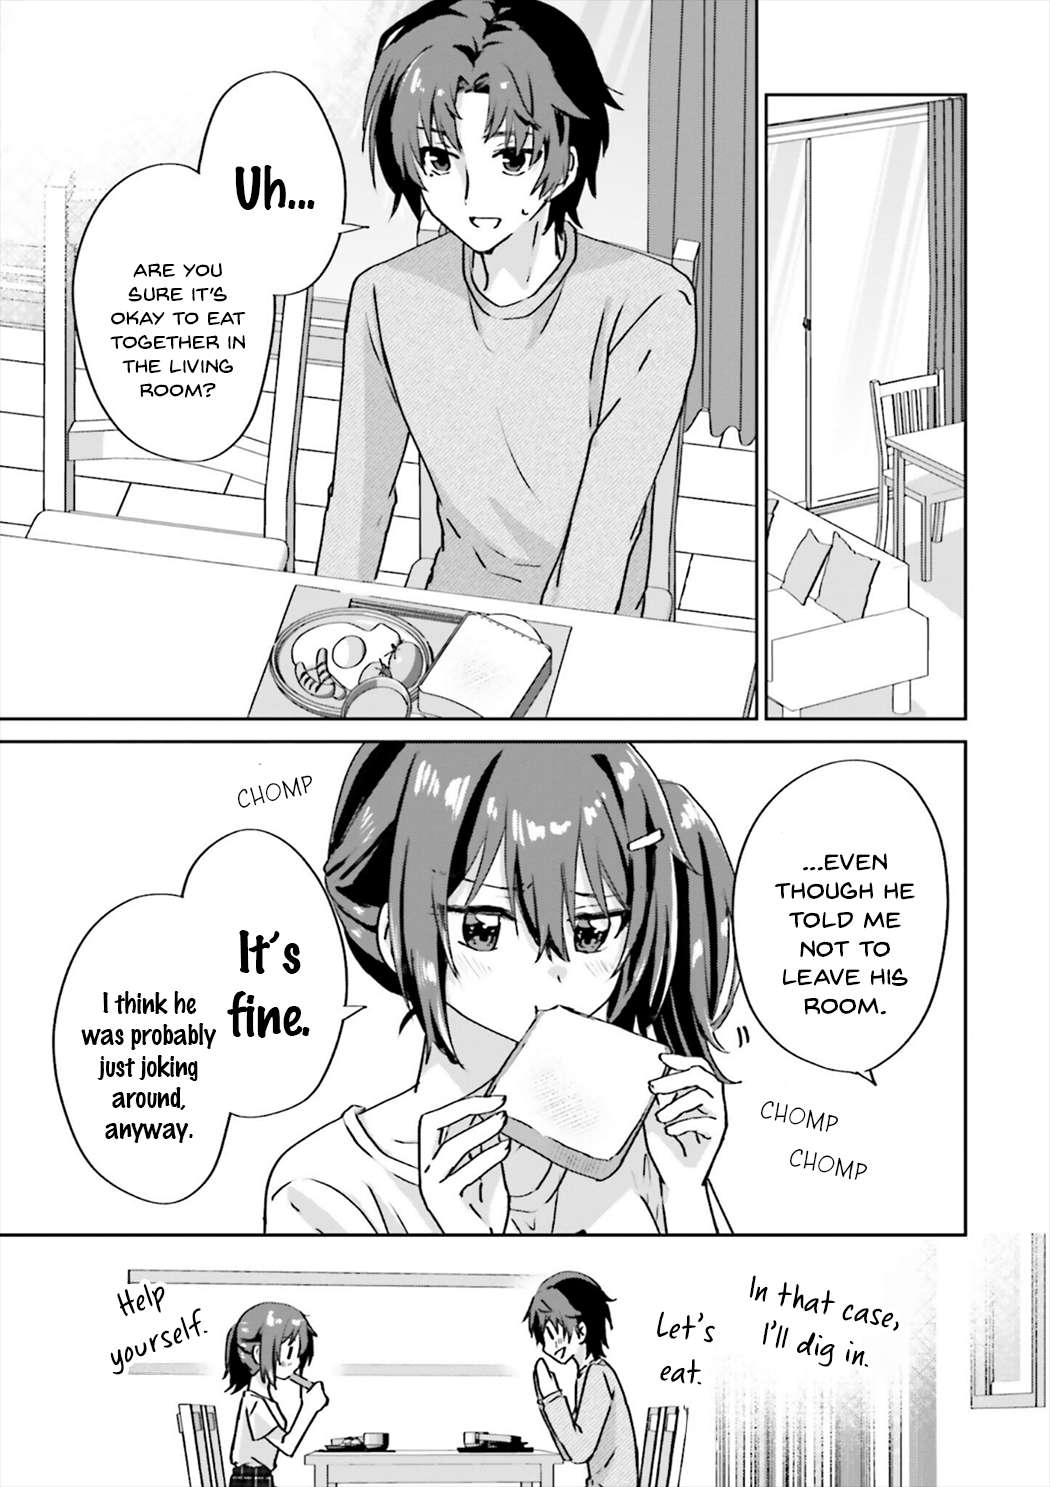 Since I’Ve Entered The World Of Romantic Comedy Manga, I’Ll Do My Best To Make The Losing Heroine Happy - chapter 6.5 - #5